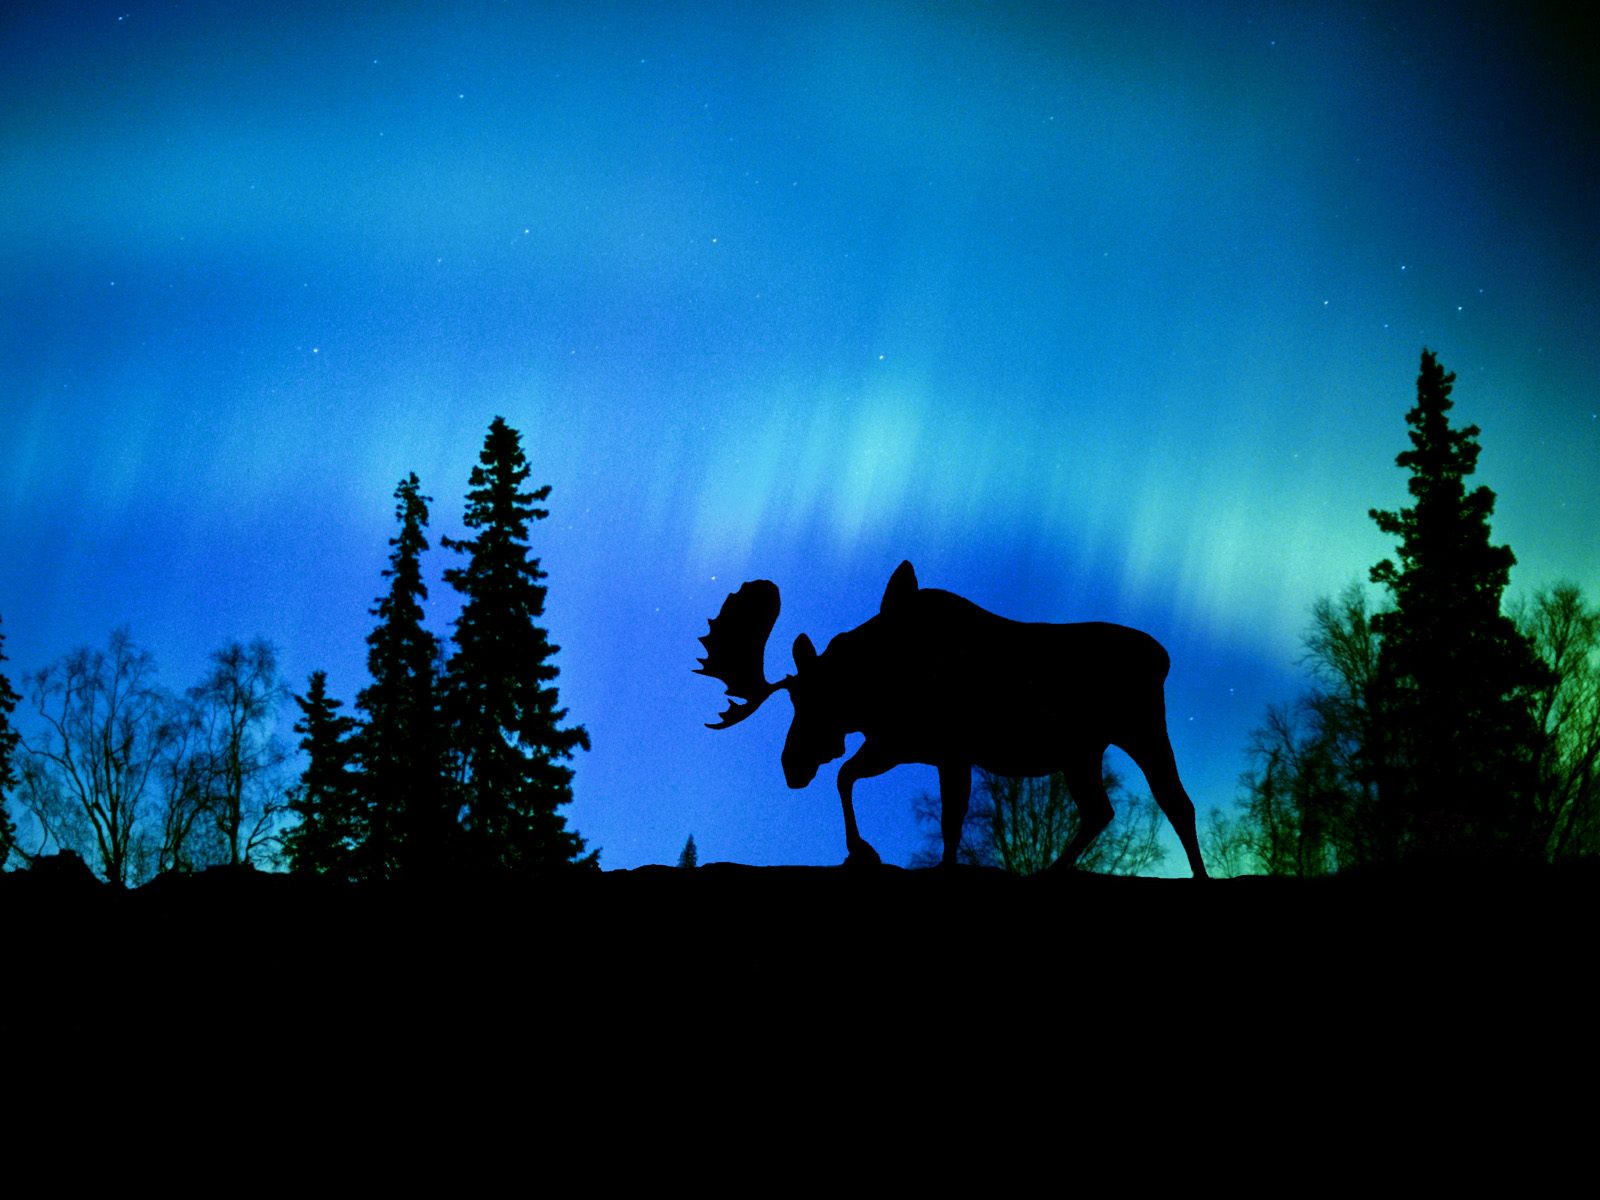 Moon shining over a majestic moose.